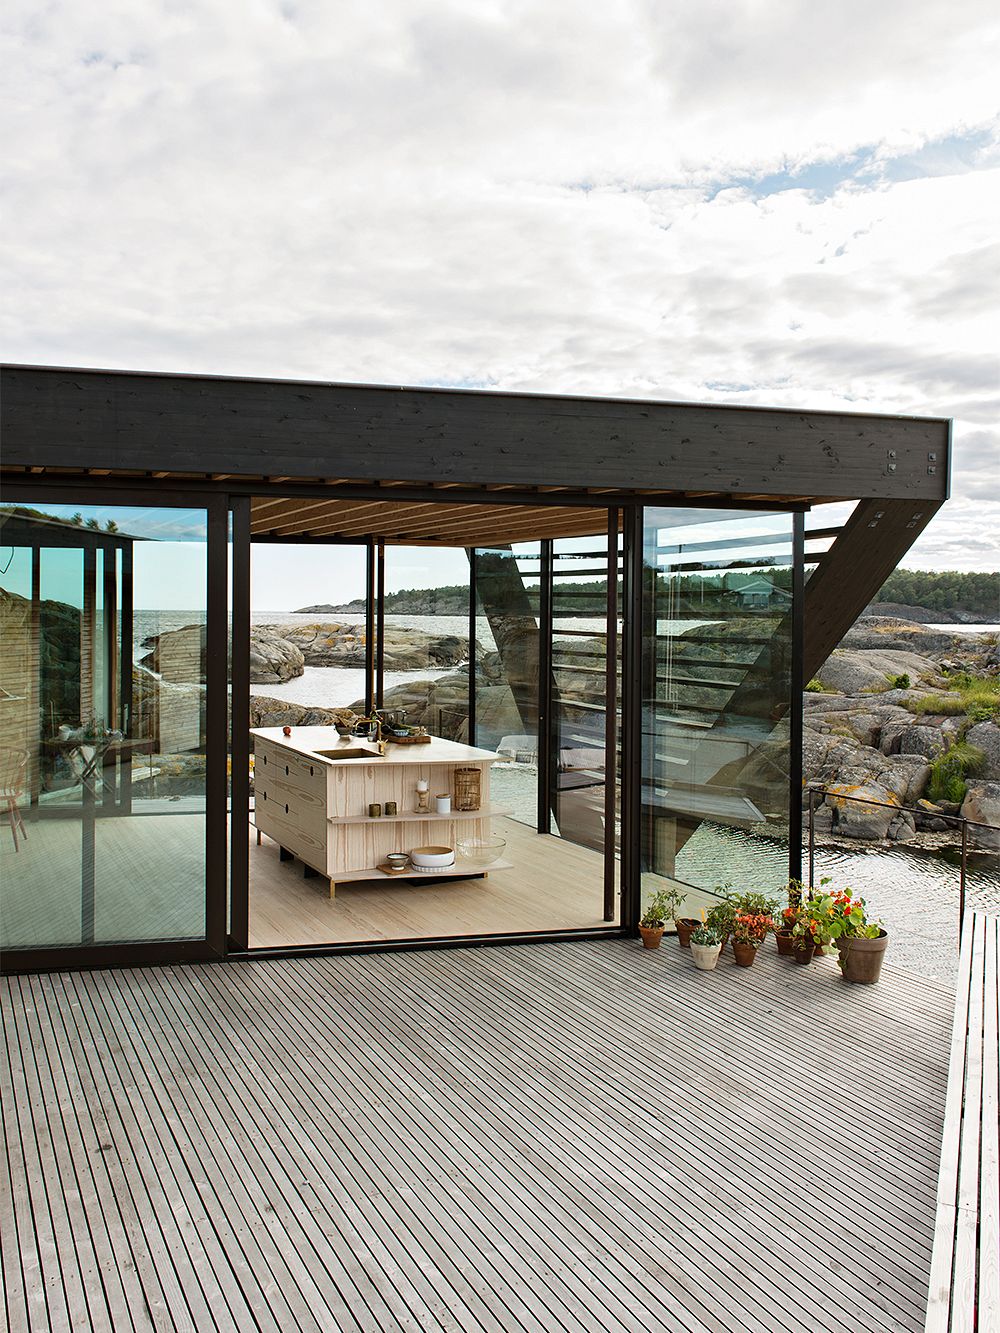 An image of Lille Arøya: the kitchen and terrace.